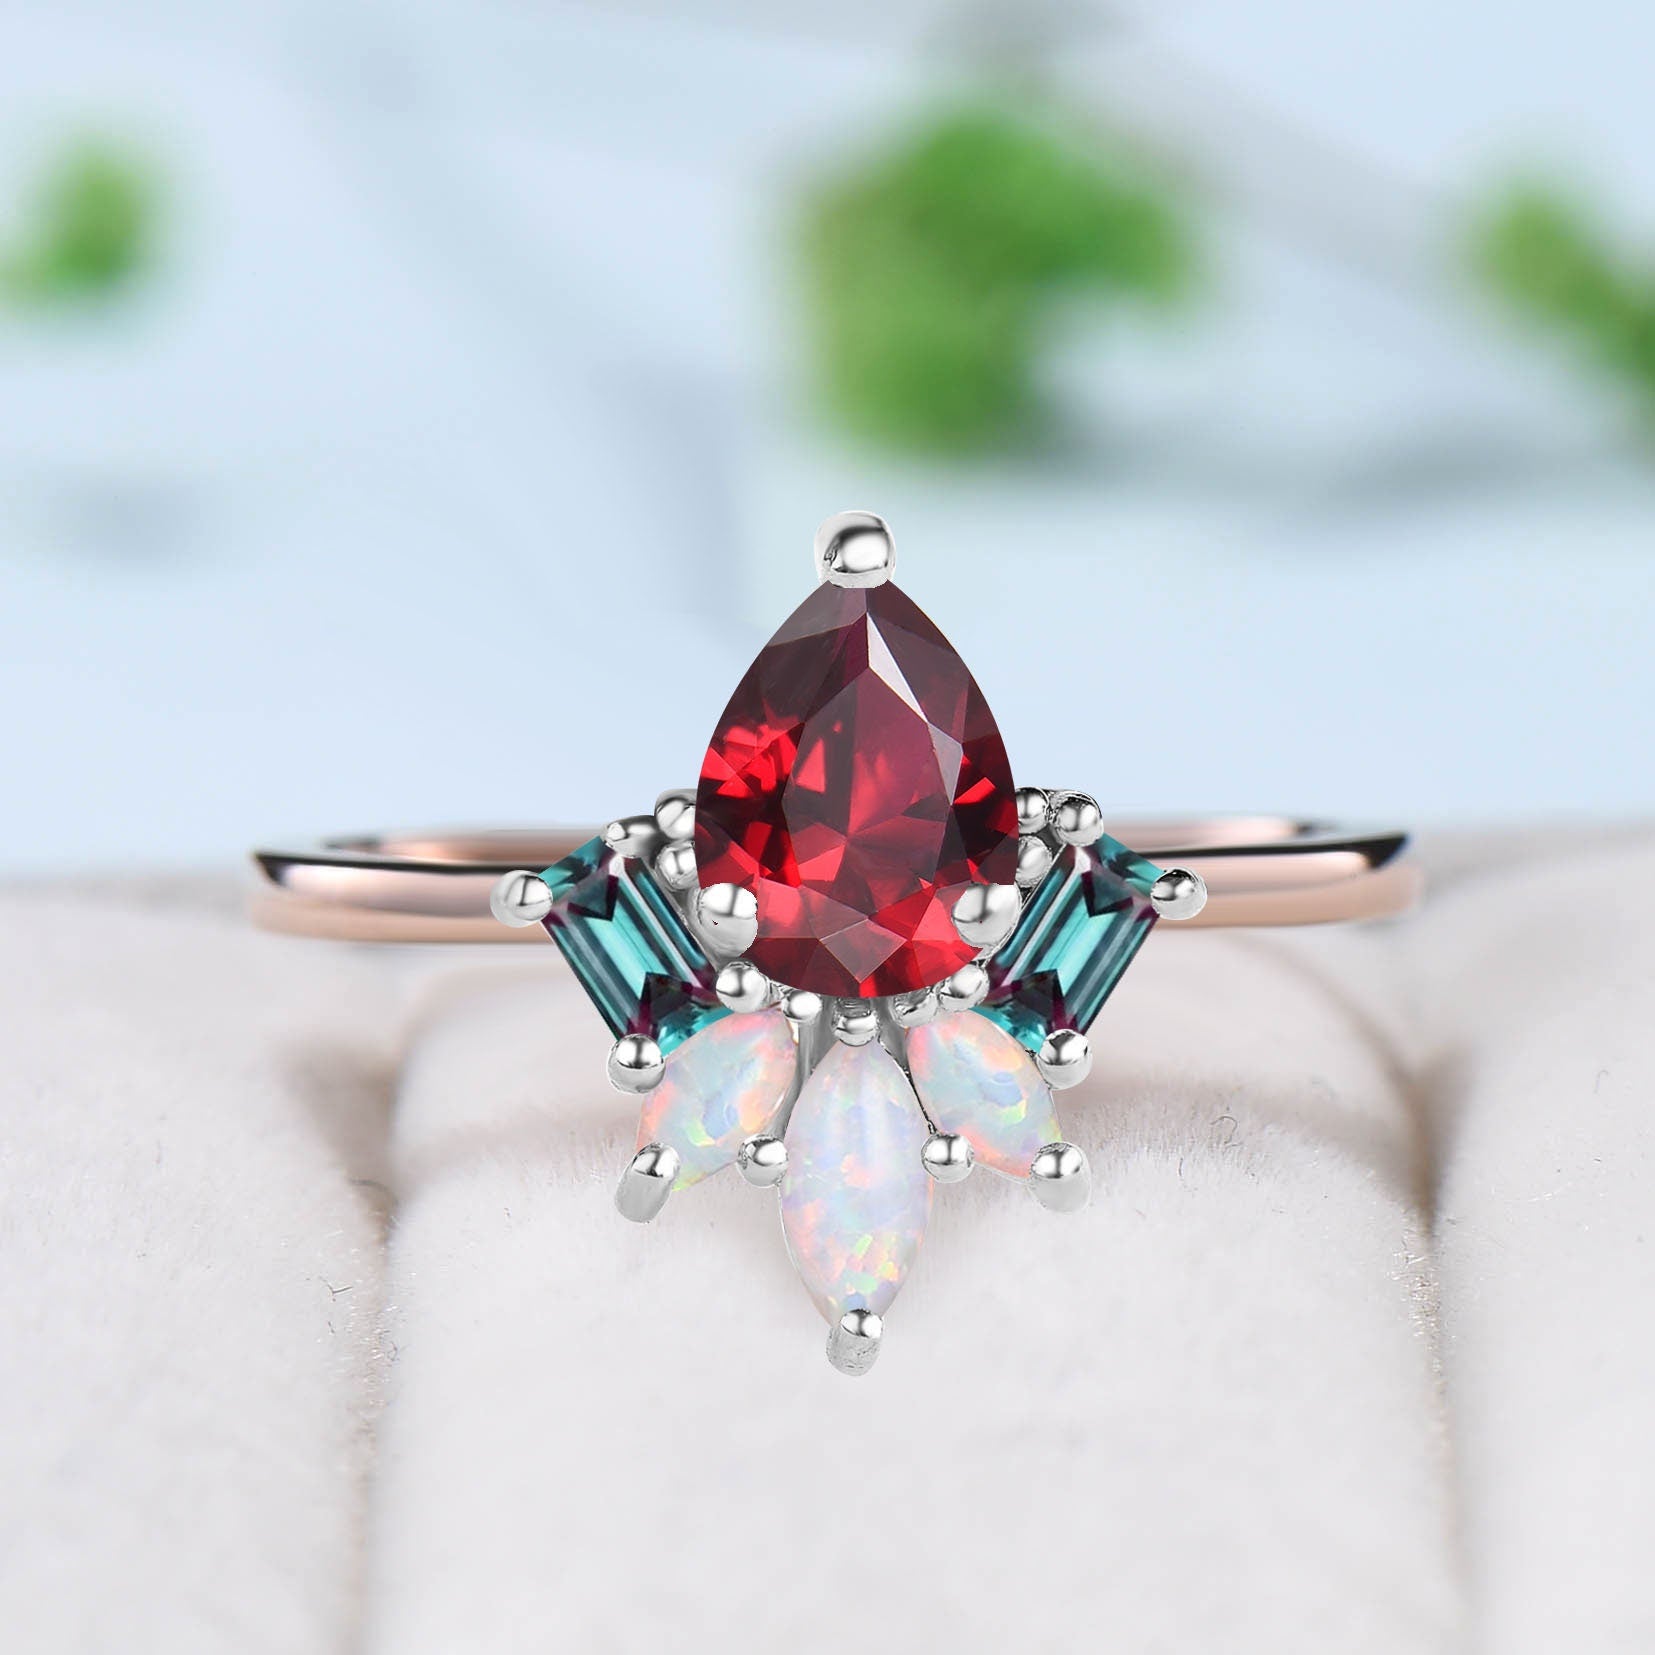 Vintage Pear Shaped Red Ruby Engagement Ring Solid 14k Rose Gold Lab Ruby Cluster Baguette Alexandrite Marquise Opal Wedding Ring For Women - PENFINE